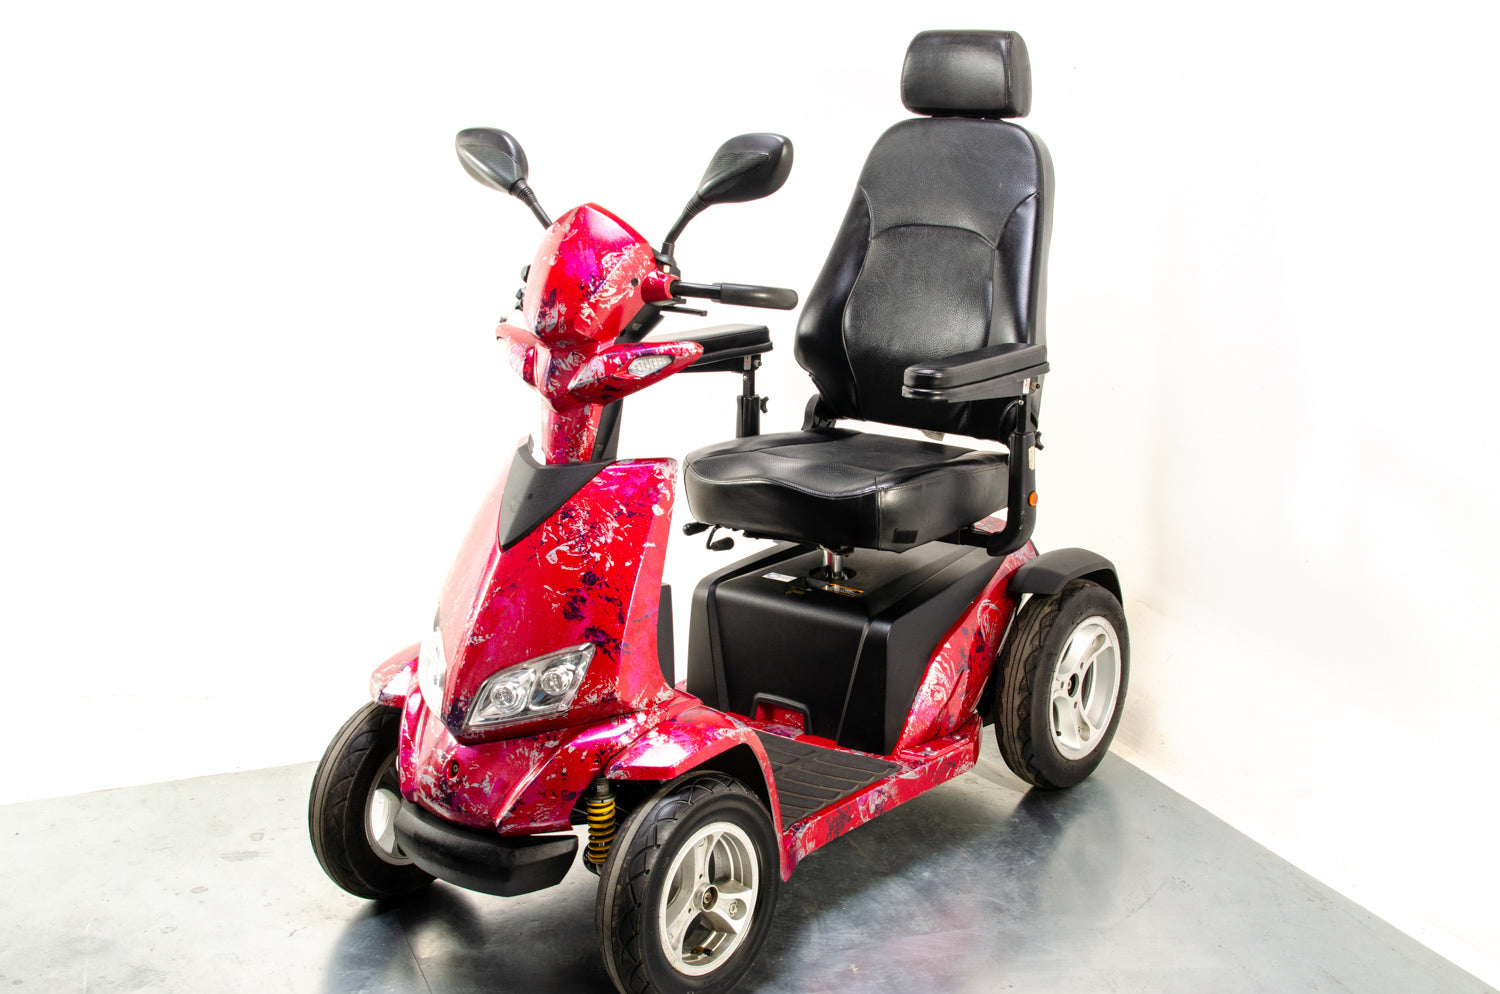 Rascal Vision Used Electric Mobility Scooter 8mph Large All-Terrain Road Legal Custom Pink Pneumatic Tyres 13453